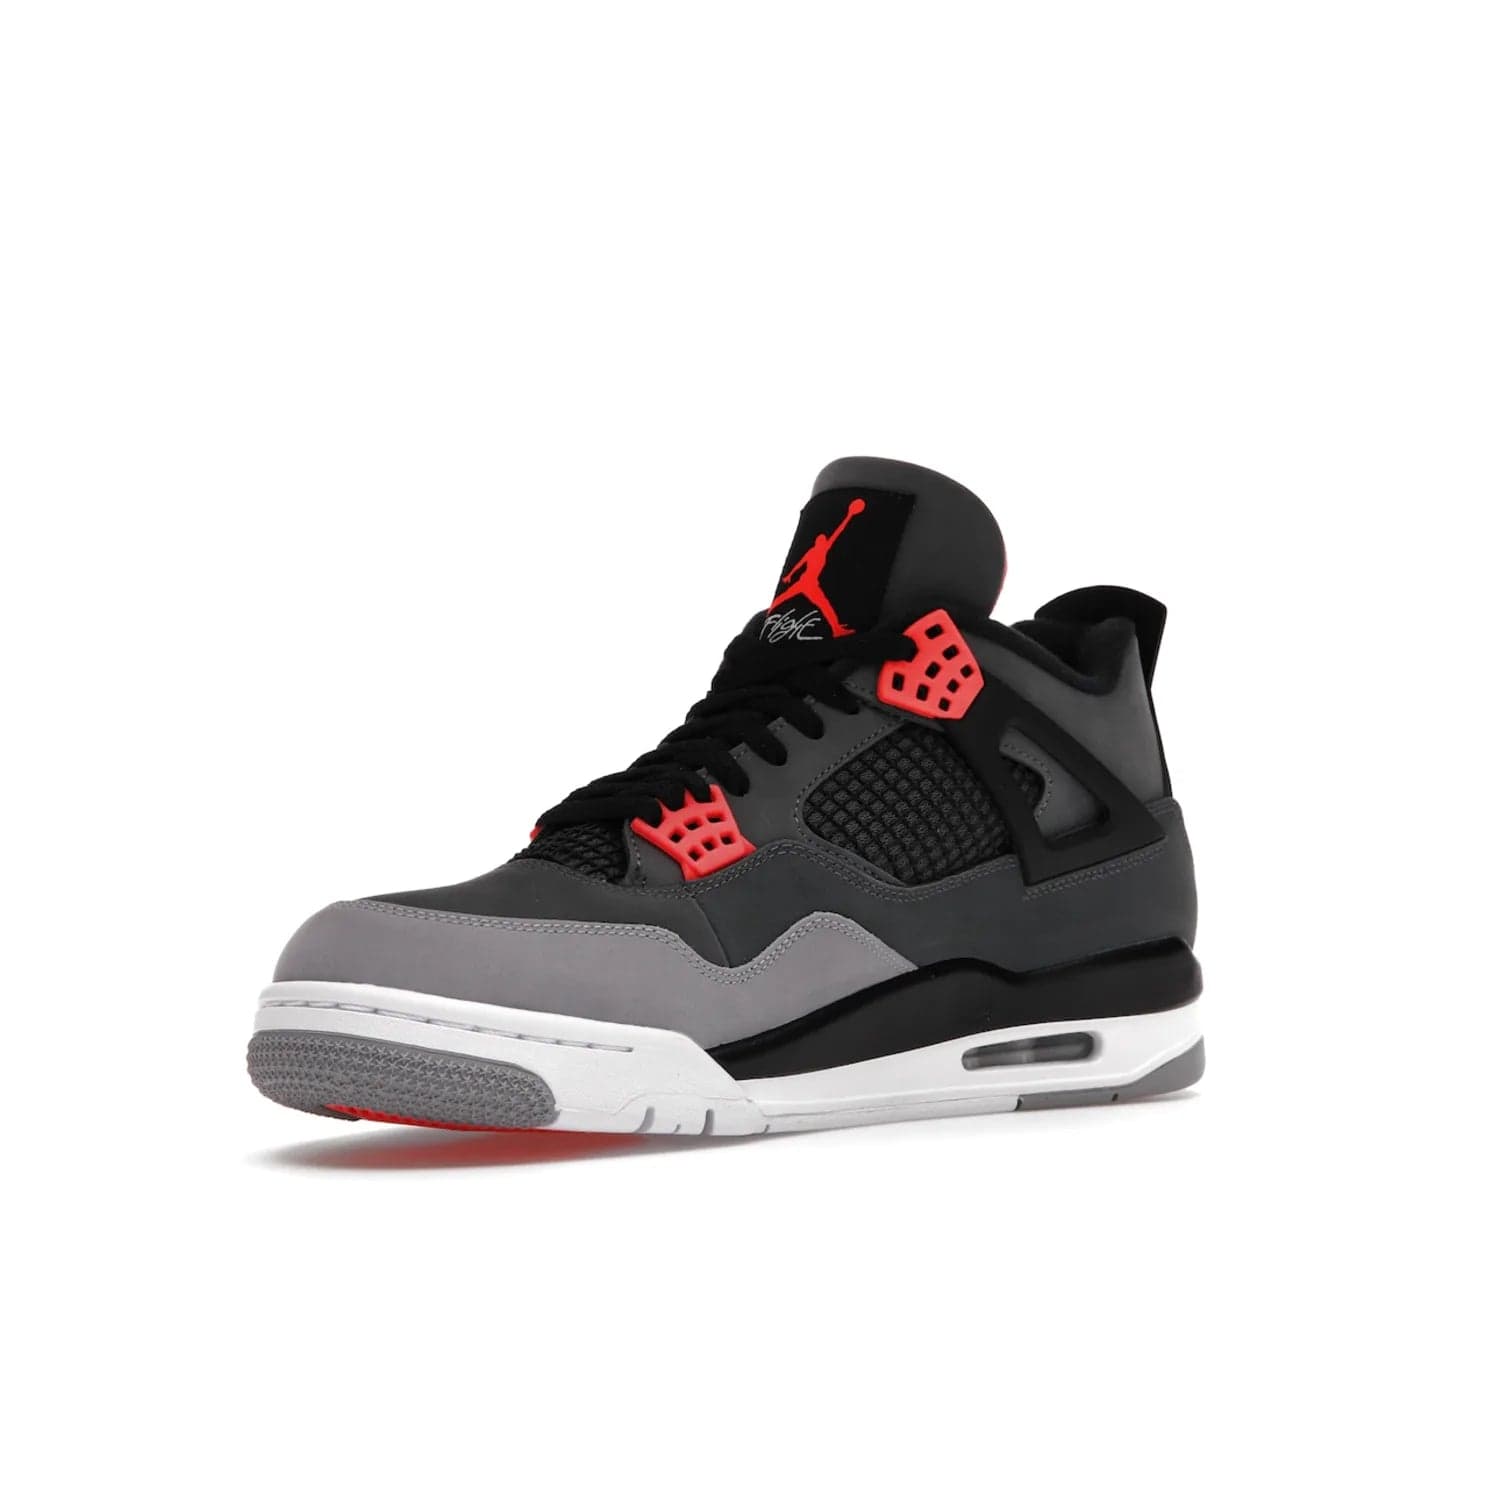 Jordan 4 Retro Infrared - Image 15 - Only at www.BallersClubKickz.com - Introducing the classic & timeless Air Jordan 4 Infrared. Durabuck upper, TPU mesh inserts, tech straps & heel tabs in dark grey and infrared accents. White sole with visible Air units. Out June 15, 2022. Get your pair now!